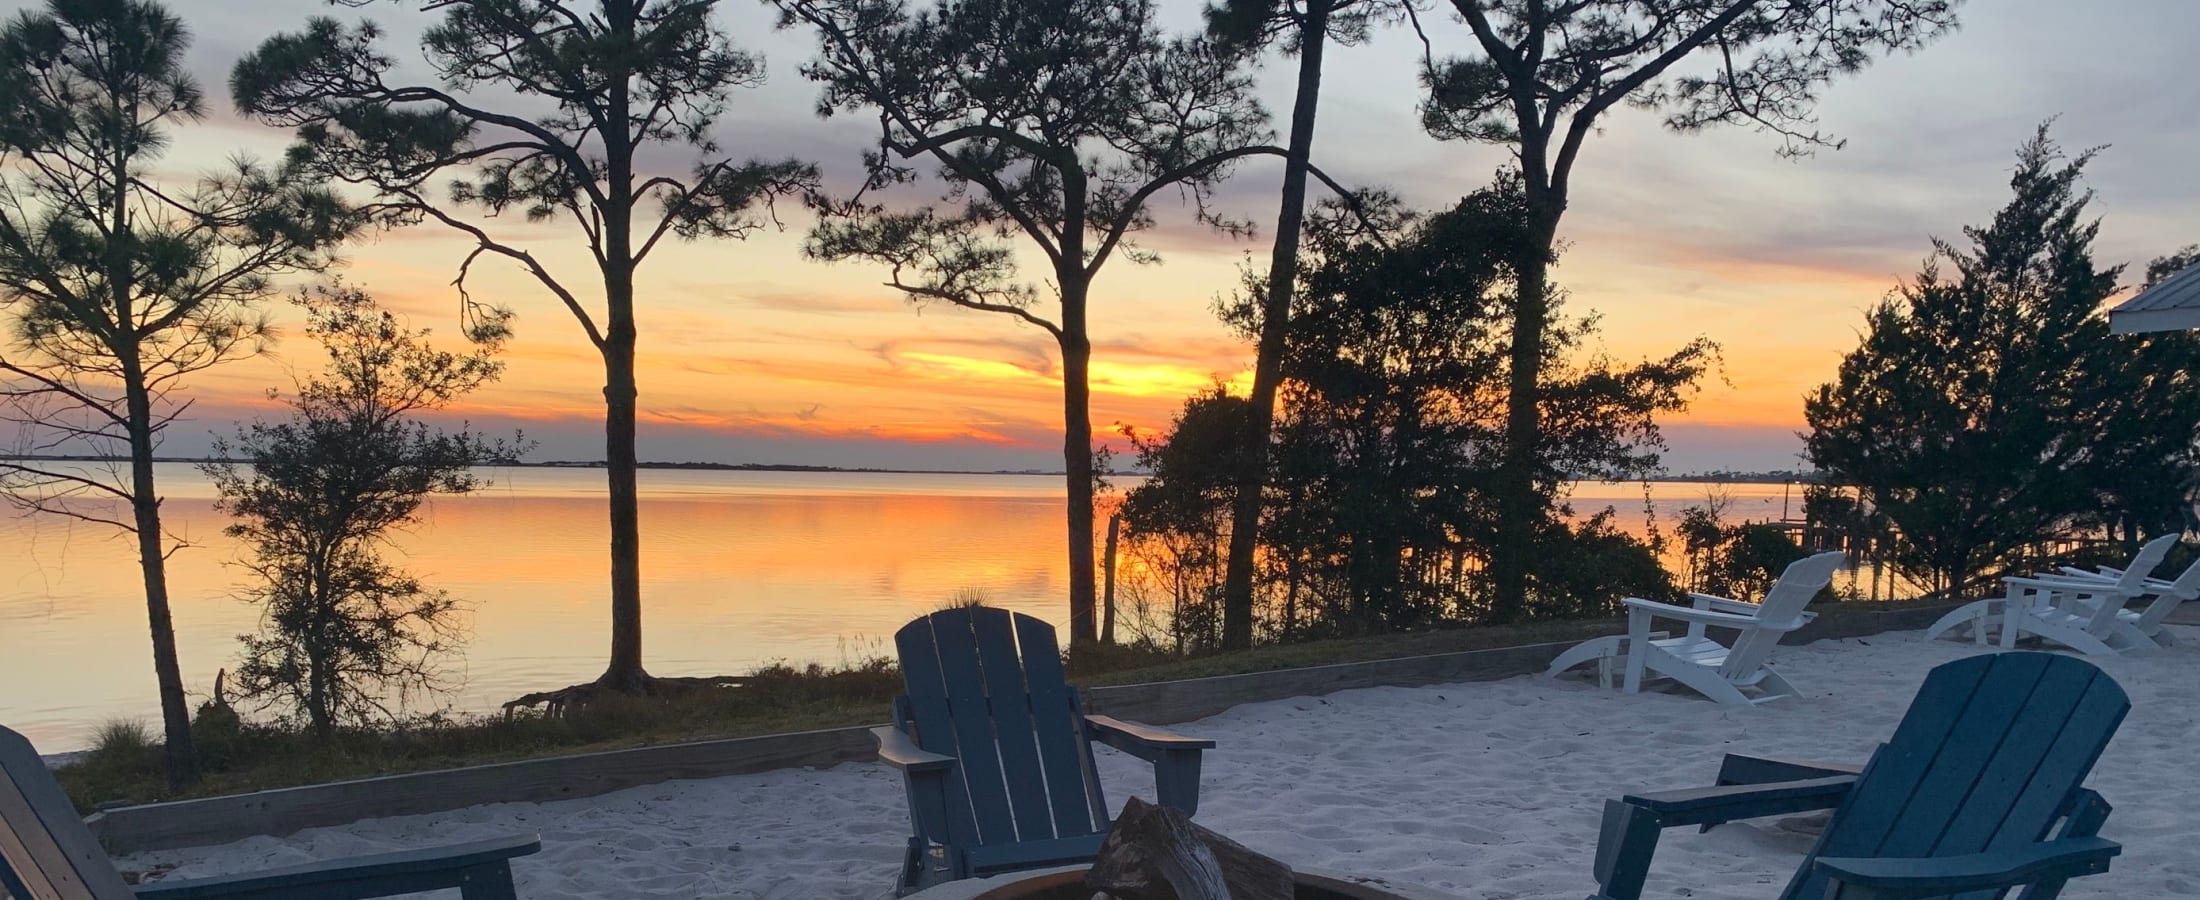 Sunset with comfy chairs and a firepit Photo Gallery | Emerald Shores in Mary Esther, Florida